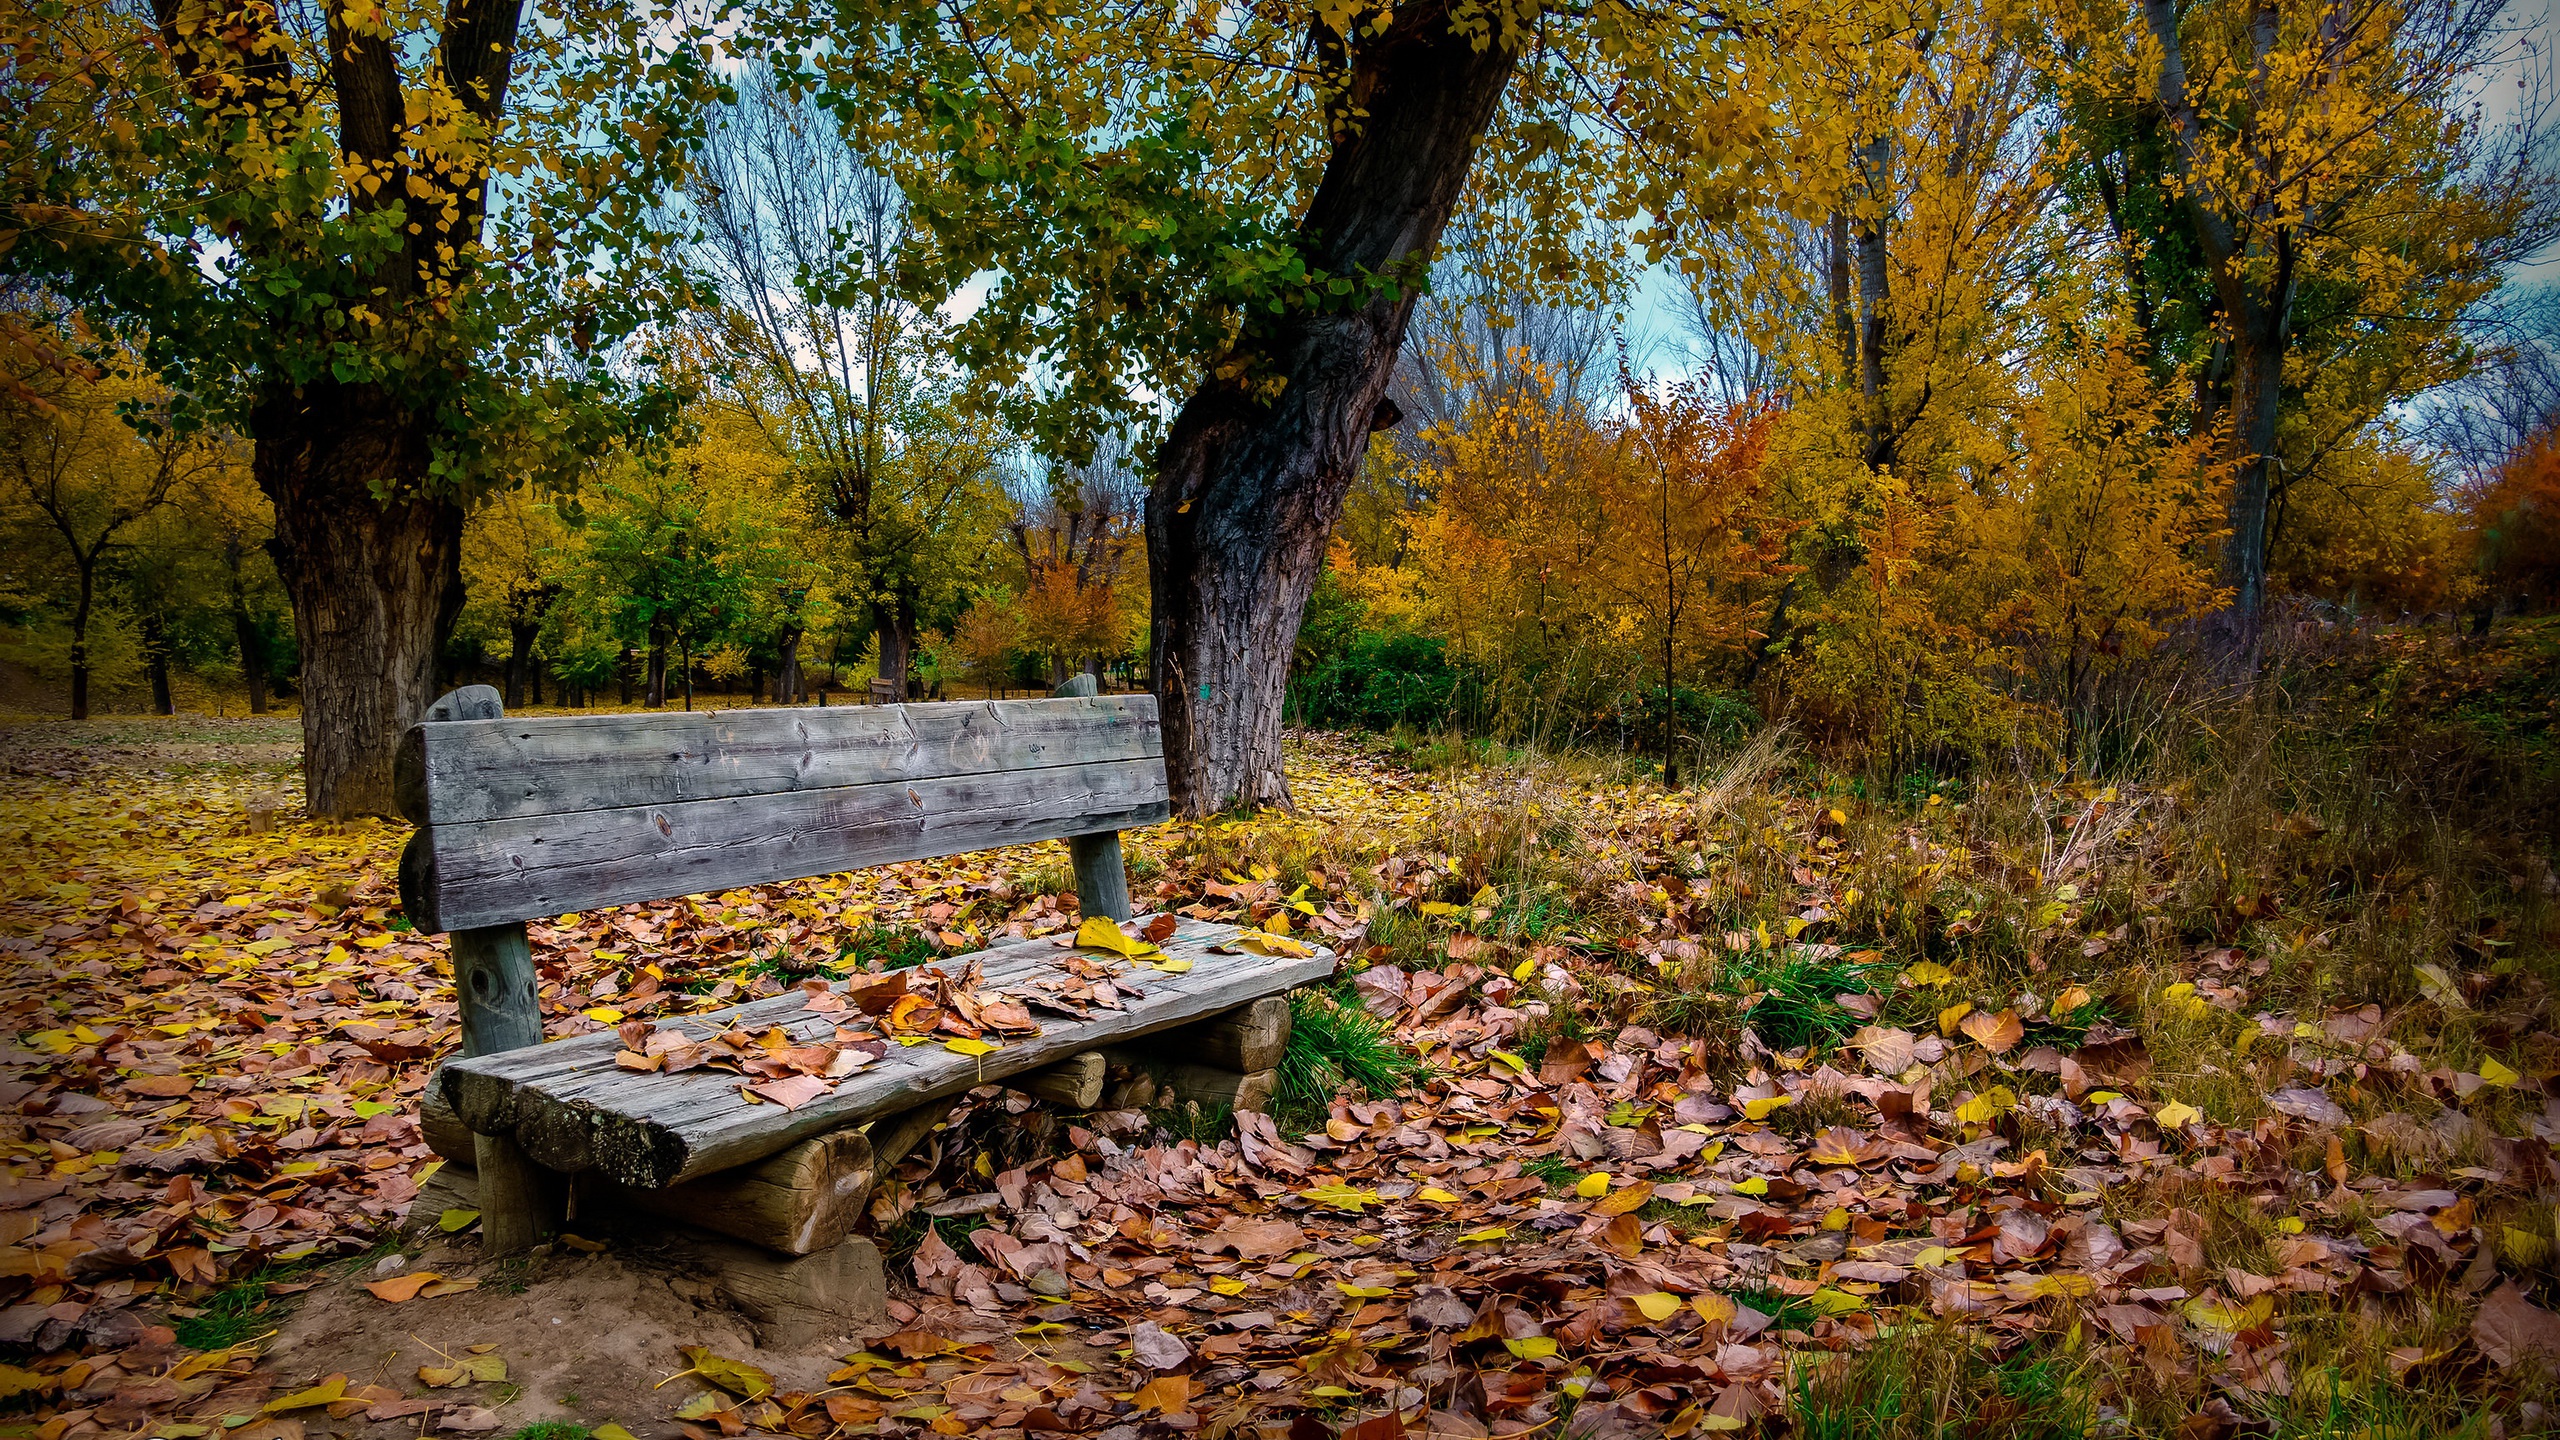 Bench Outdoors Trees Nature Fall Fallen Leaves Plants 2560x1440